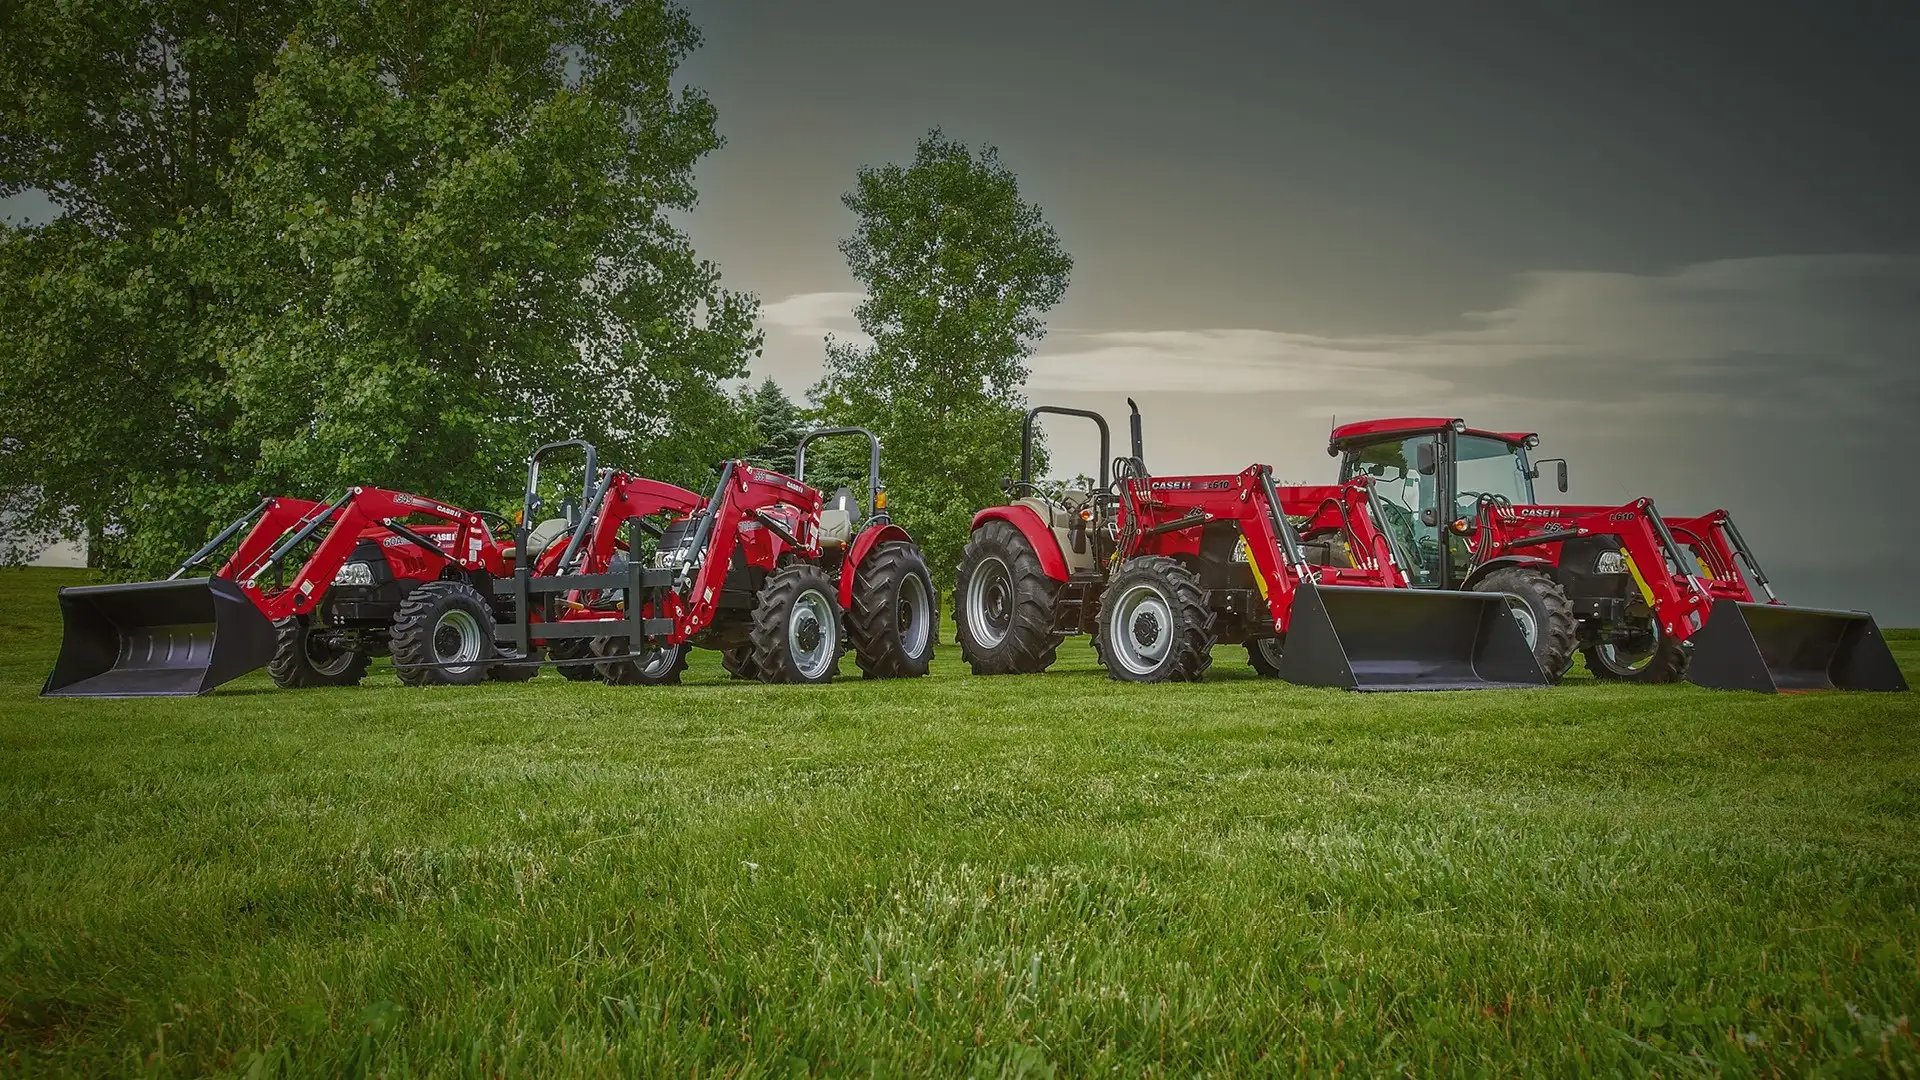 lineup of farmall tractors with front loader